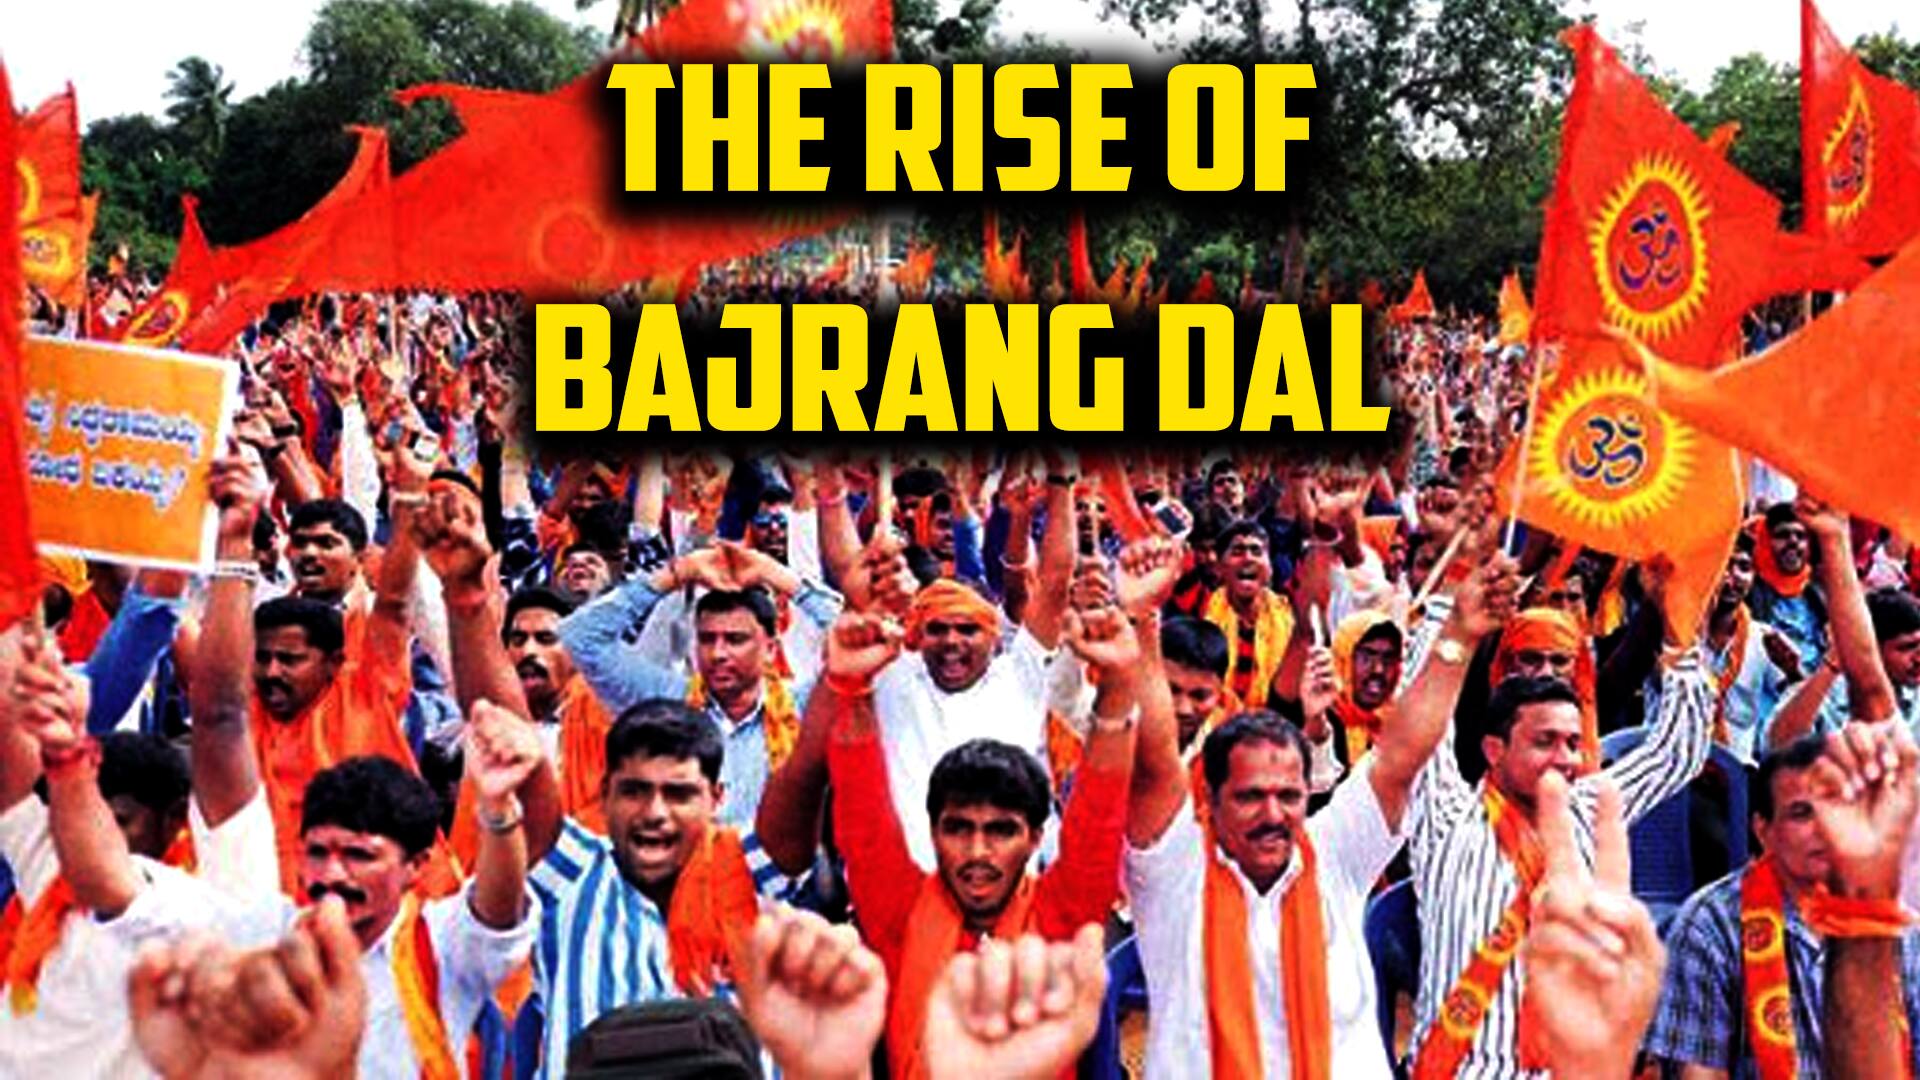 Karnataka elections 2018: The rise and growth of Bajrang Dal in the state